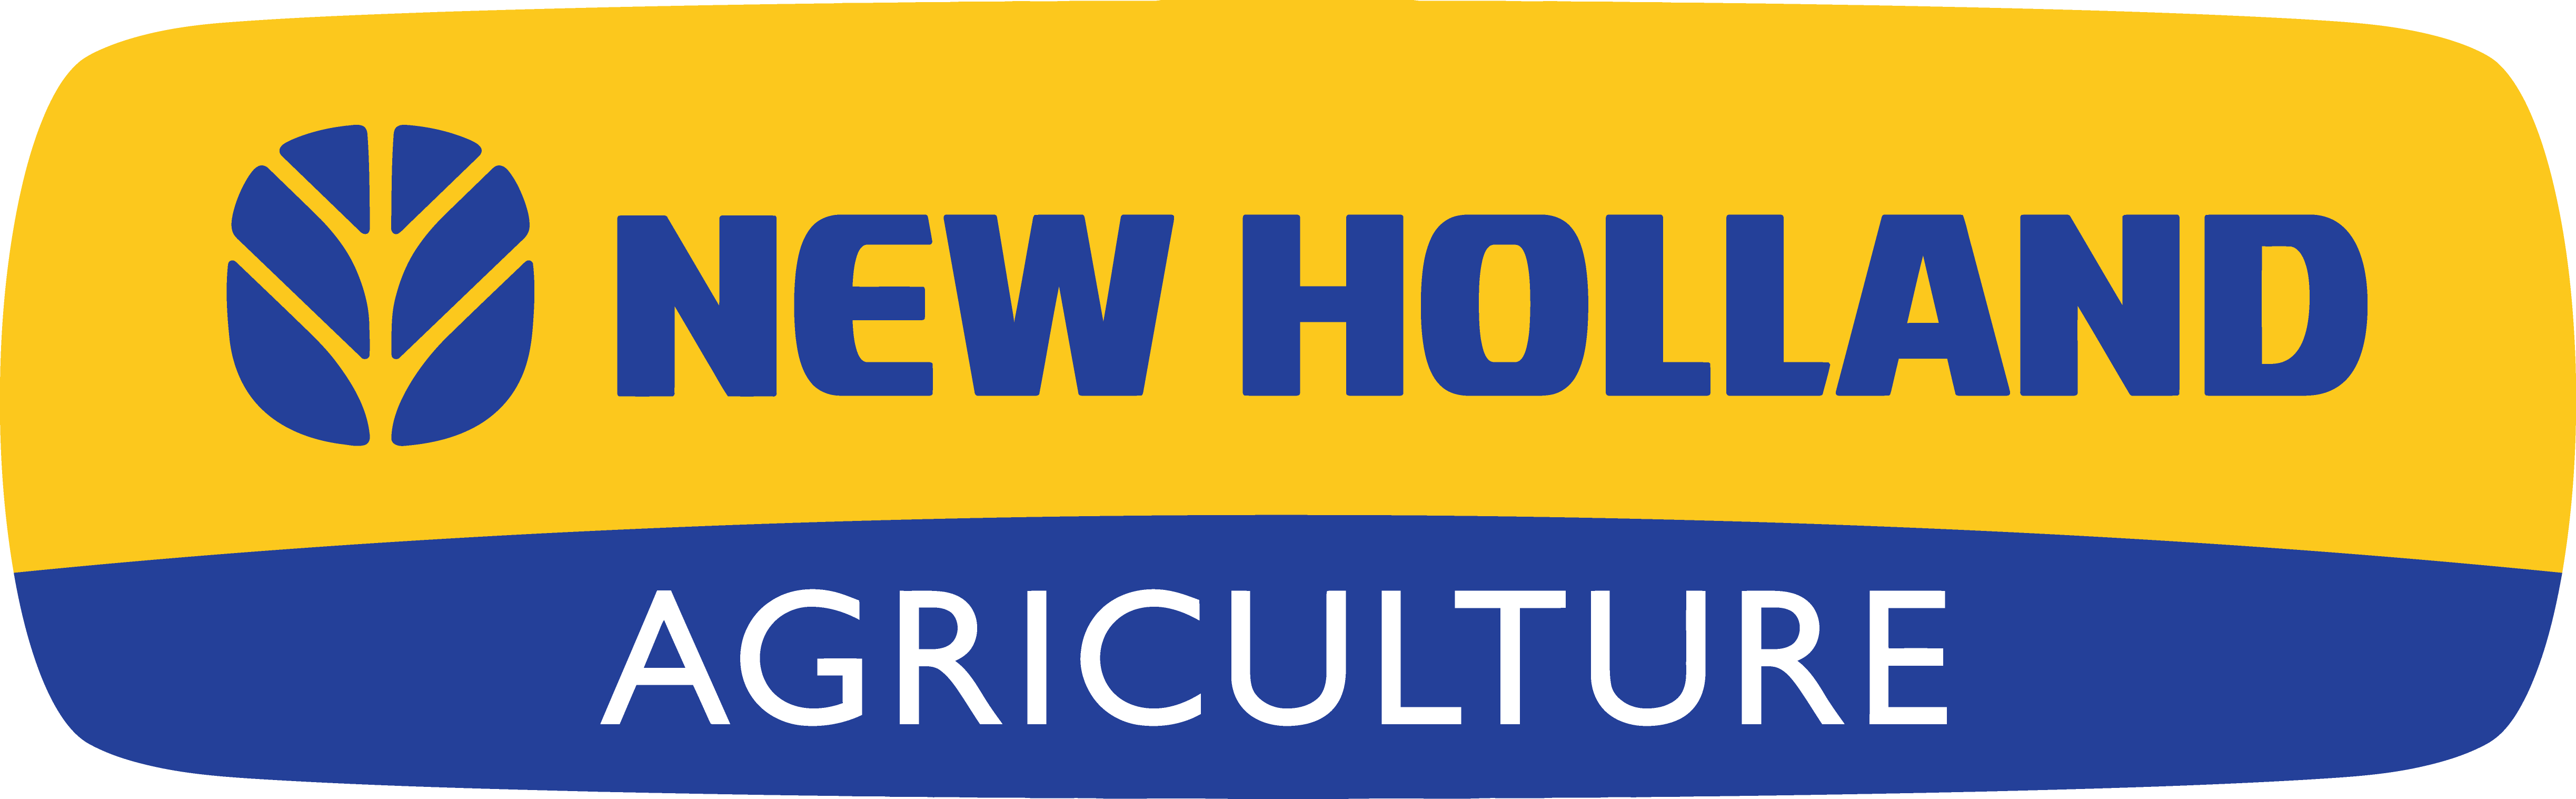 New Holland Agriculture Logo - New Holland Agriculture | uiuyiyu